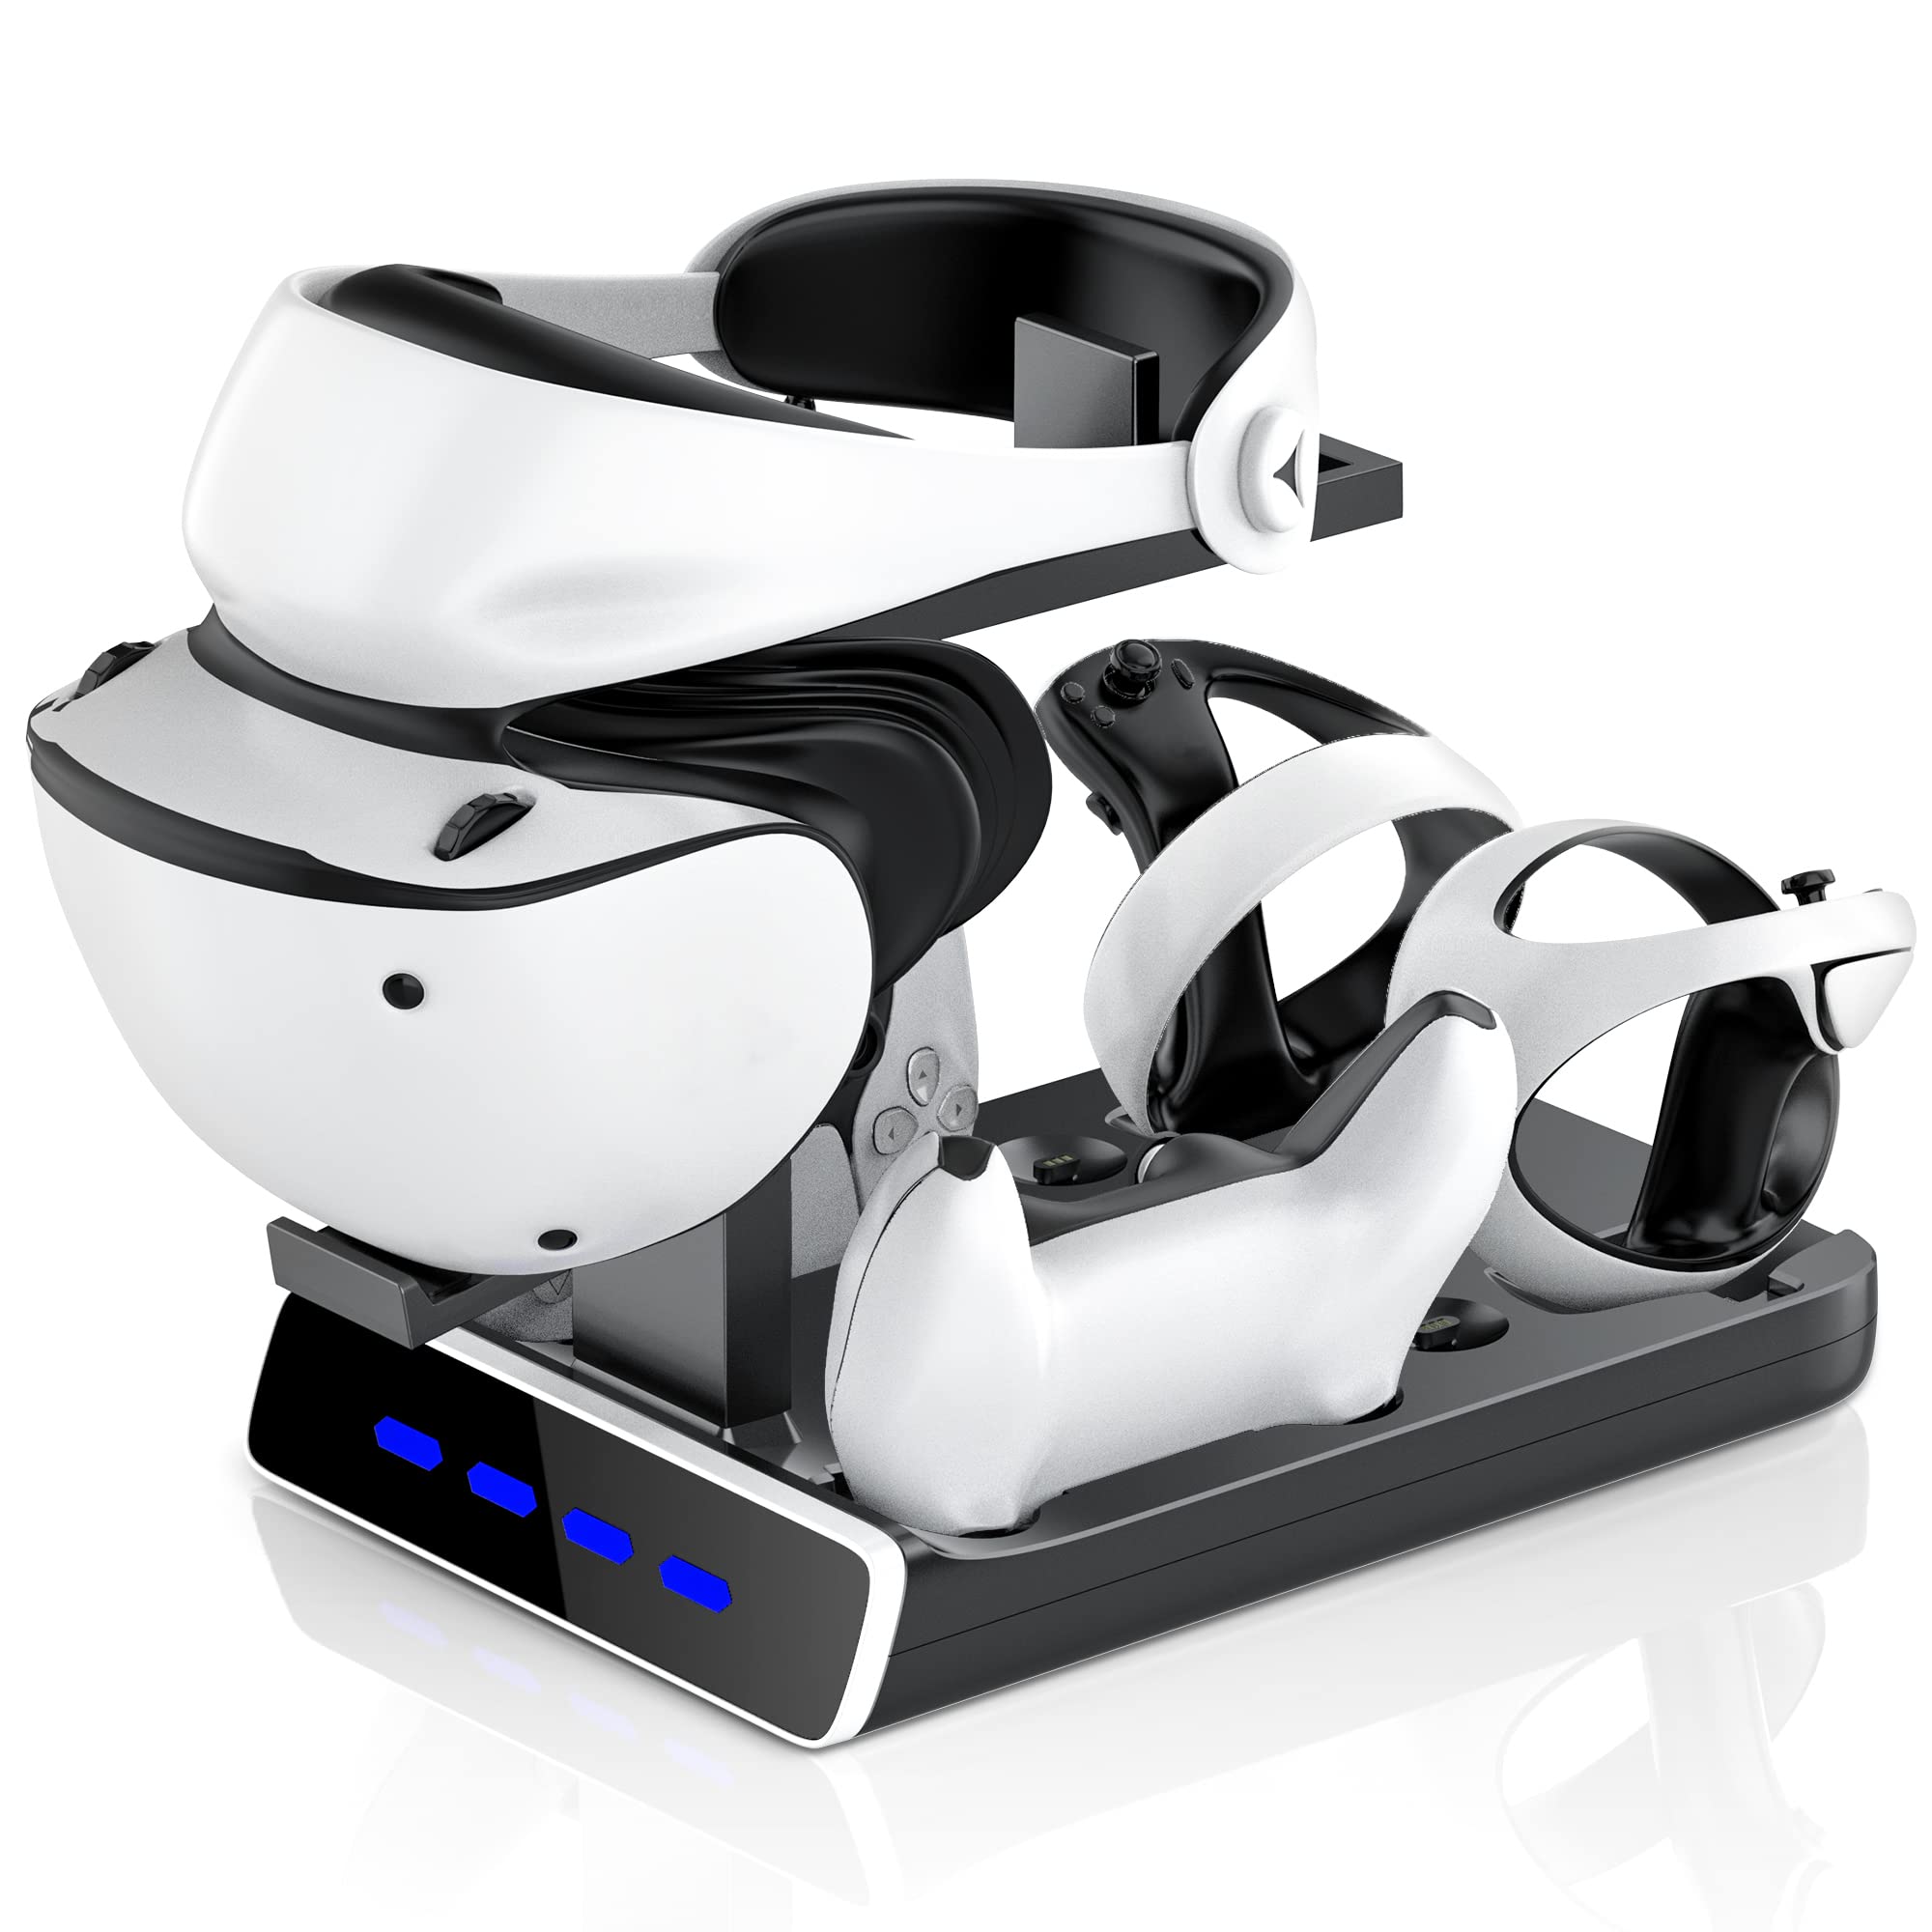 PSVR2 Controller Charging Dock with LED Light， VR Stand Display Your PSVR2， Charging Compatible with PS5 Controller Charger， Playstation VR2 Handle, Charging Cable, Seat Charger